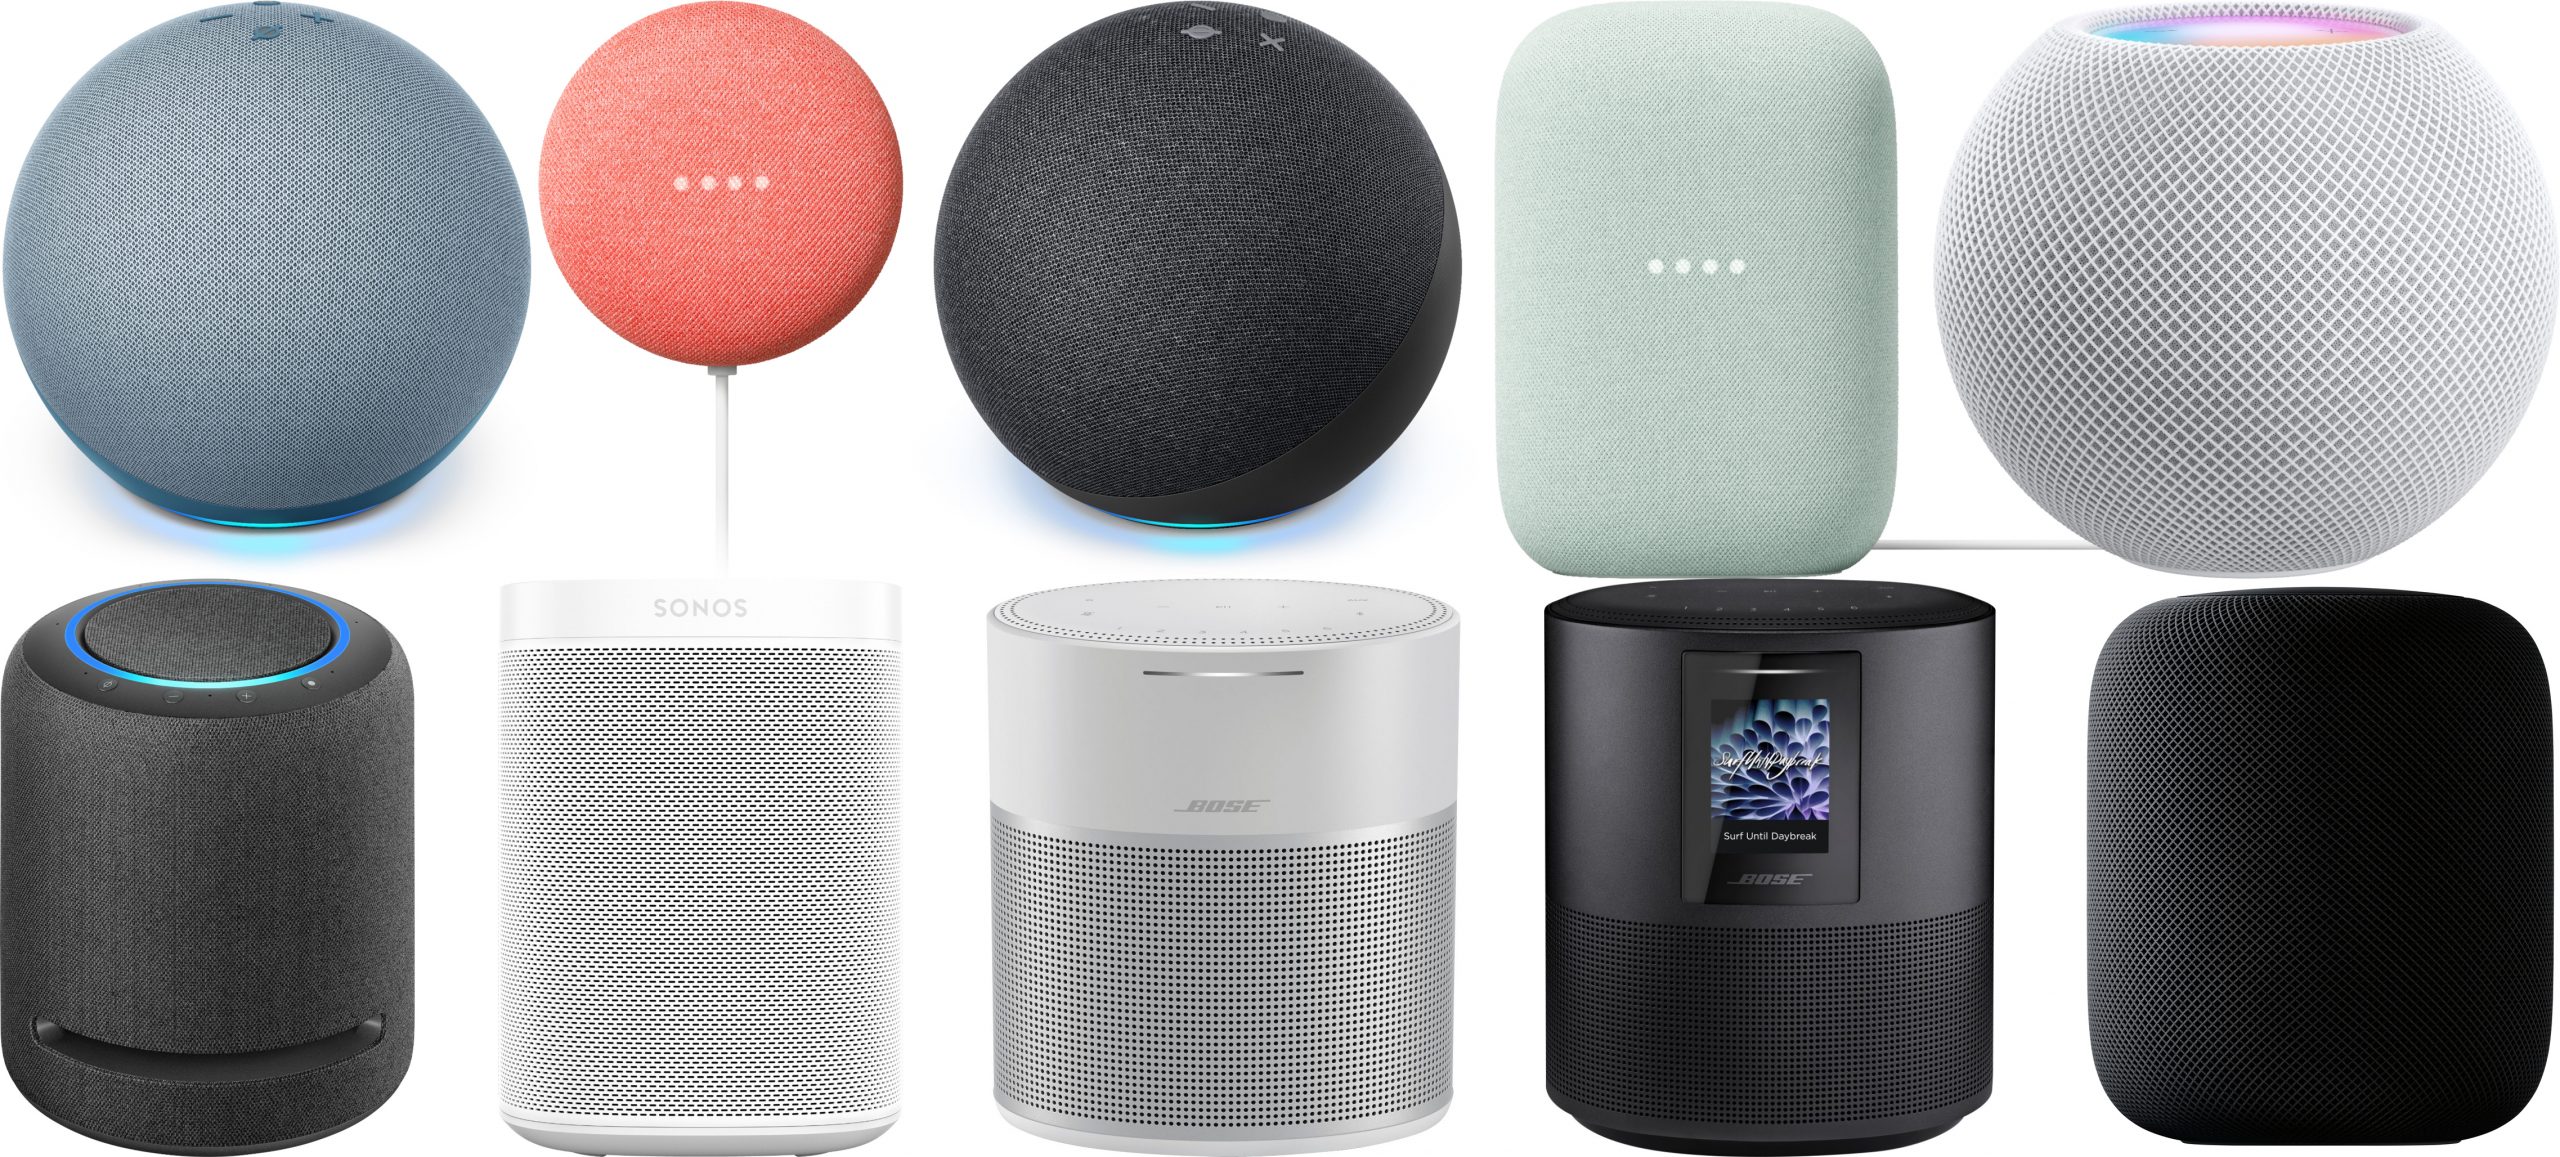 The best home smart speakers at every price point in 2021 – Amazon Alexa, Google Assistant and Apple Siri-enabled